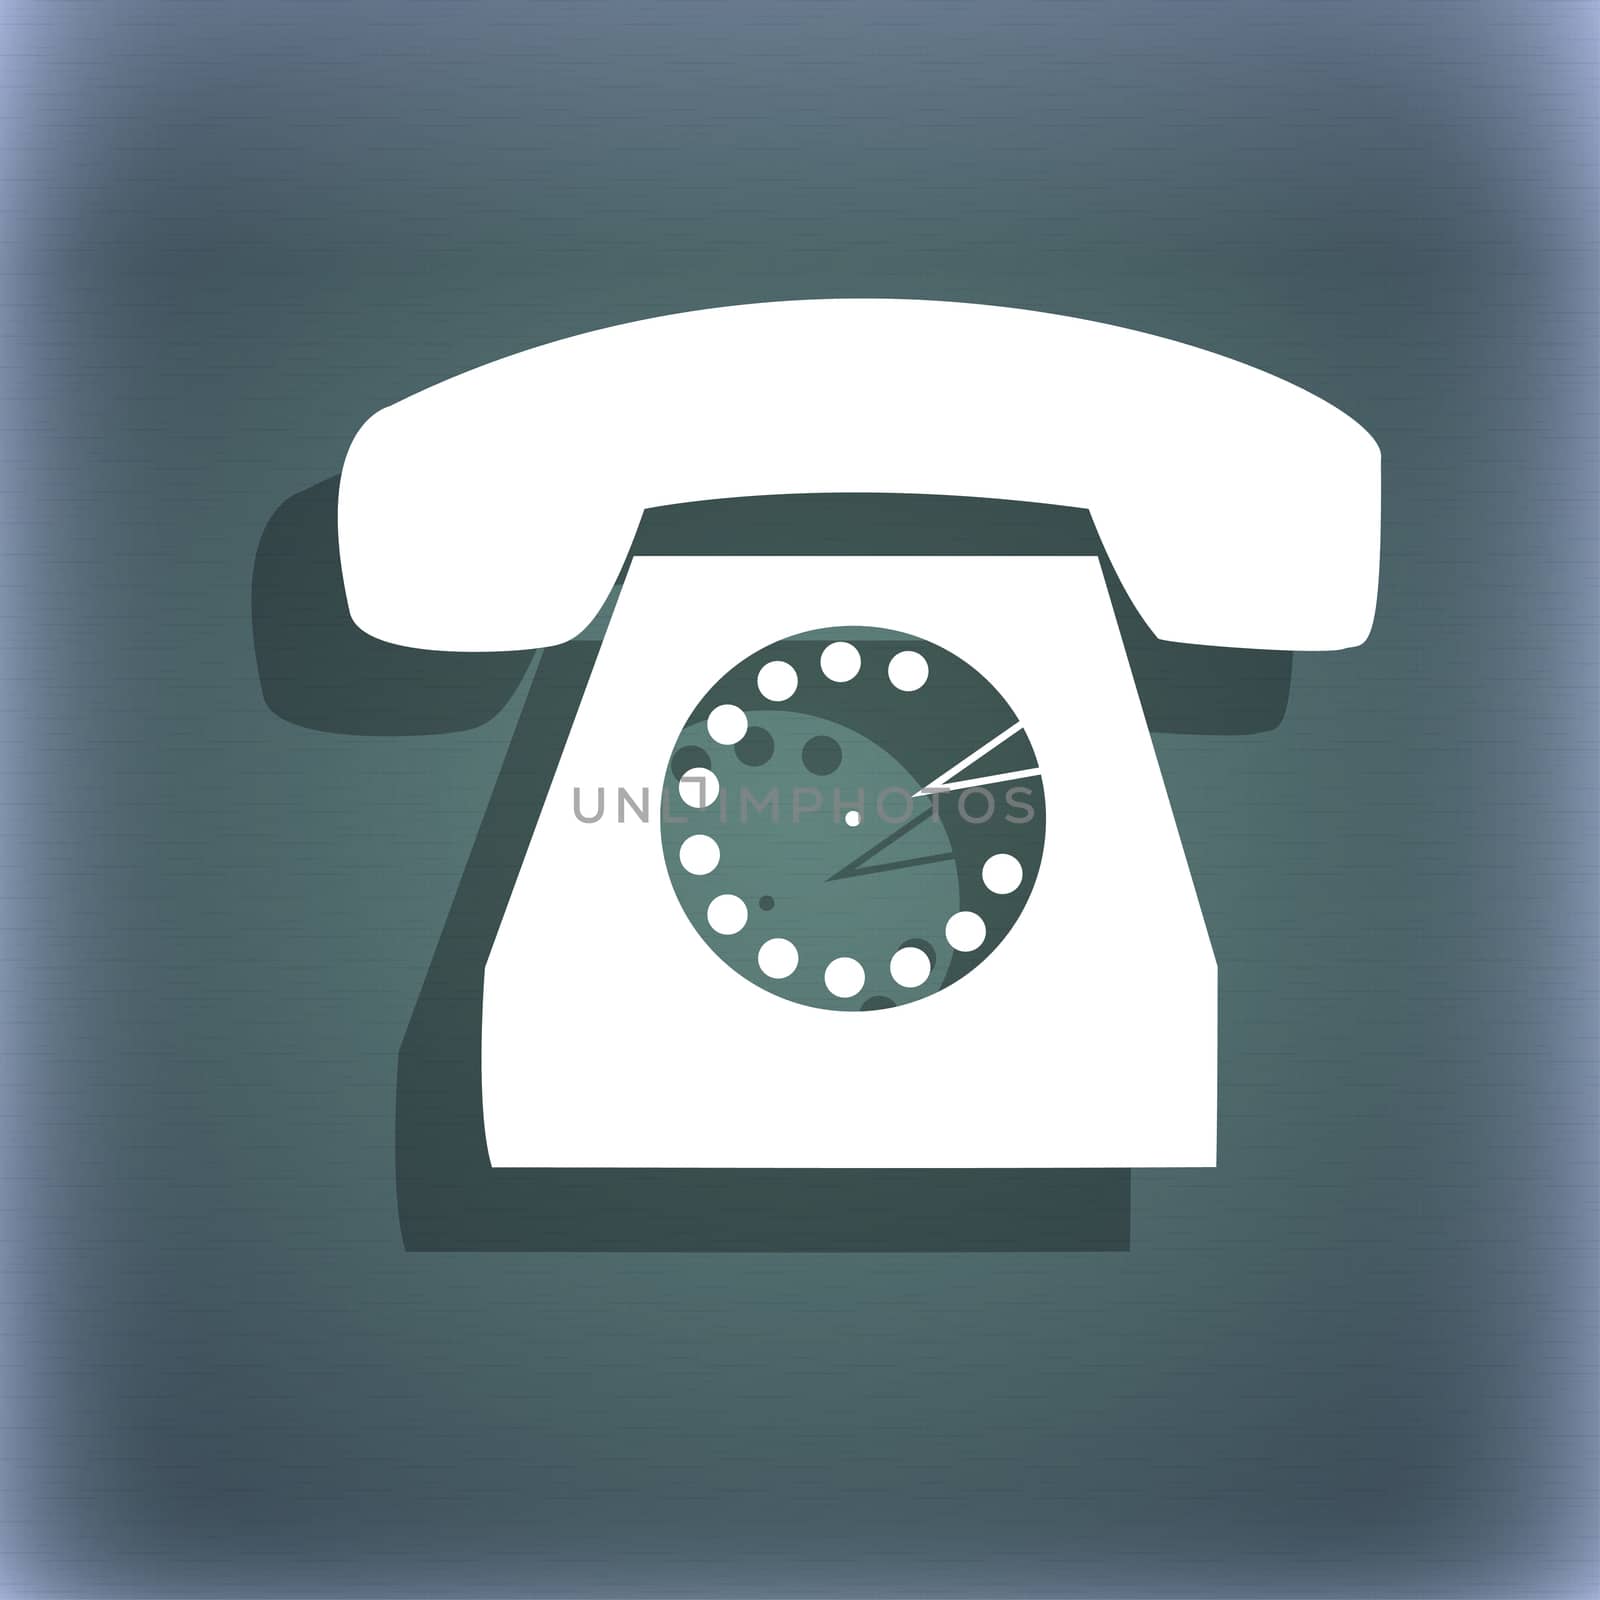 Retro telephone icon symbol. On the blue-green abstract background with shadow and space for your text.  by serhii_lohvyniuk